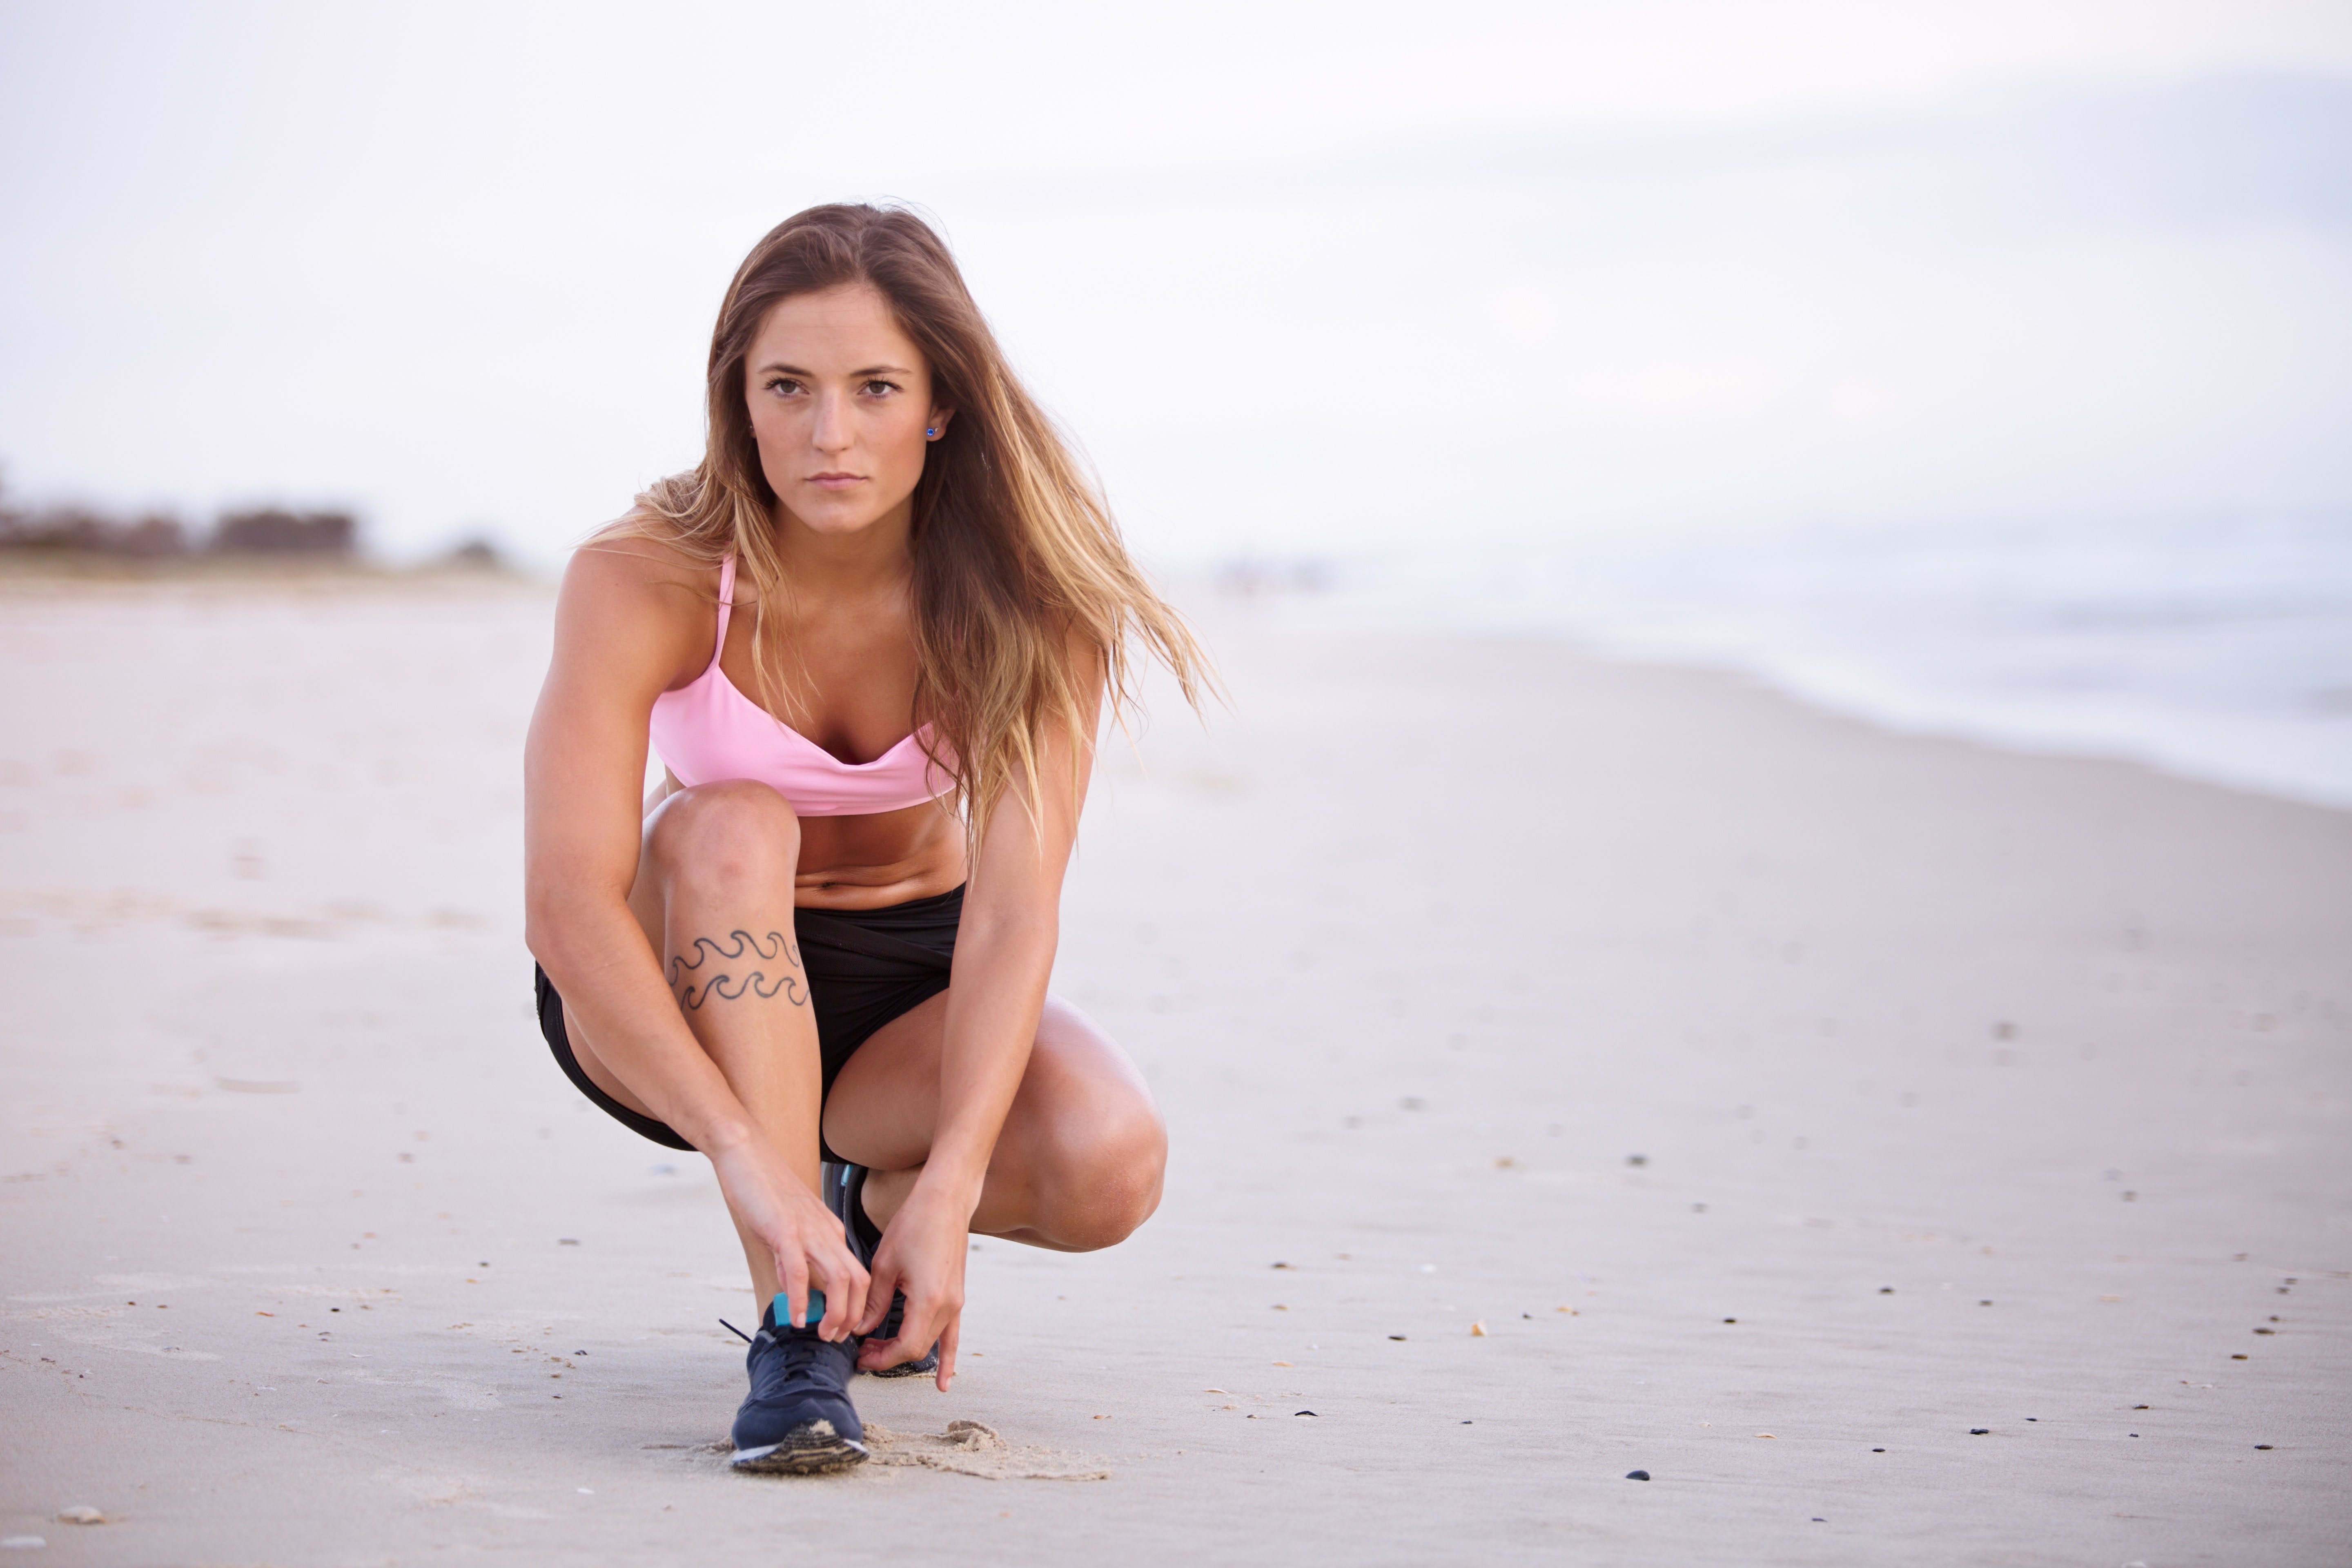 Woman in Pink Top and Black Shorts Lacing Her Shoes on Sea Shore, Attractive, Sea, Waves, Water, HQ Photo